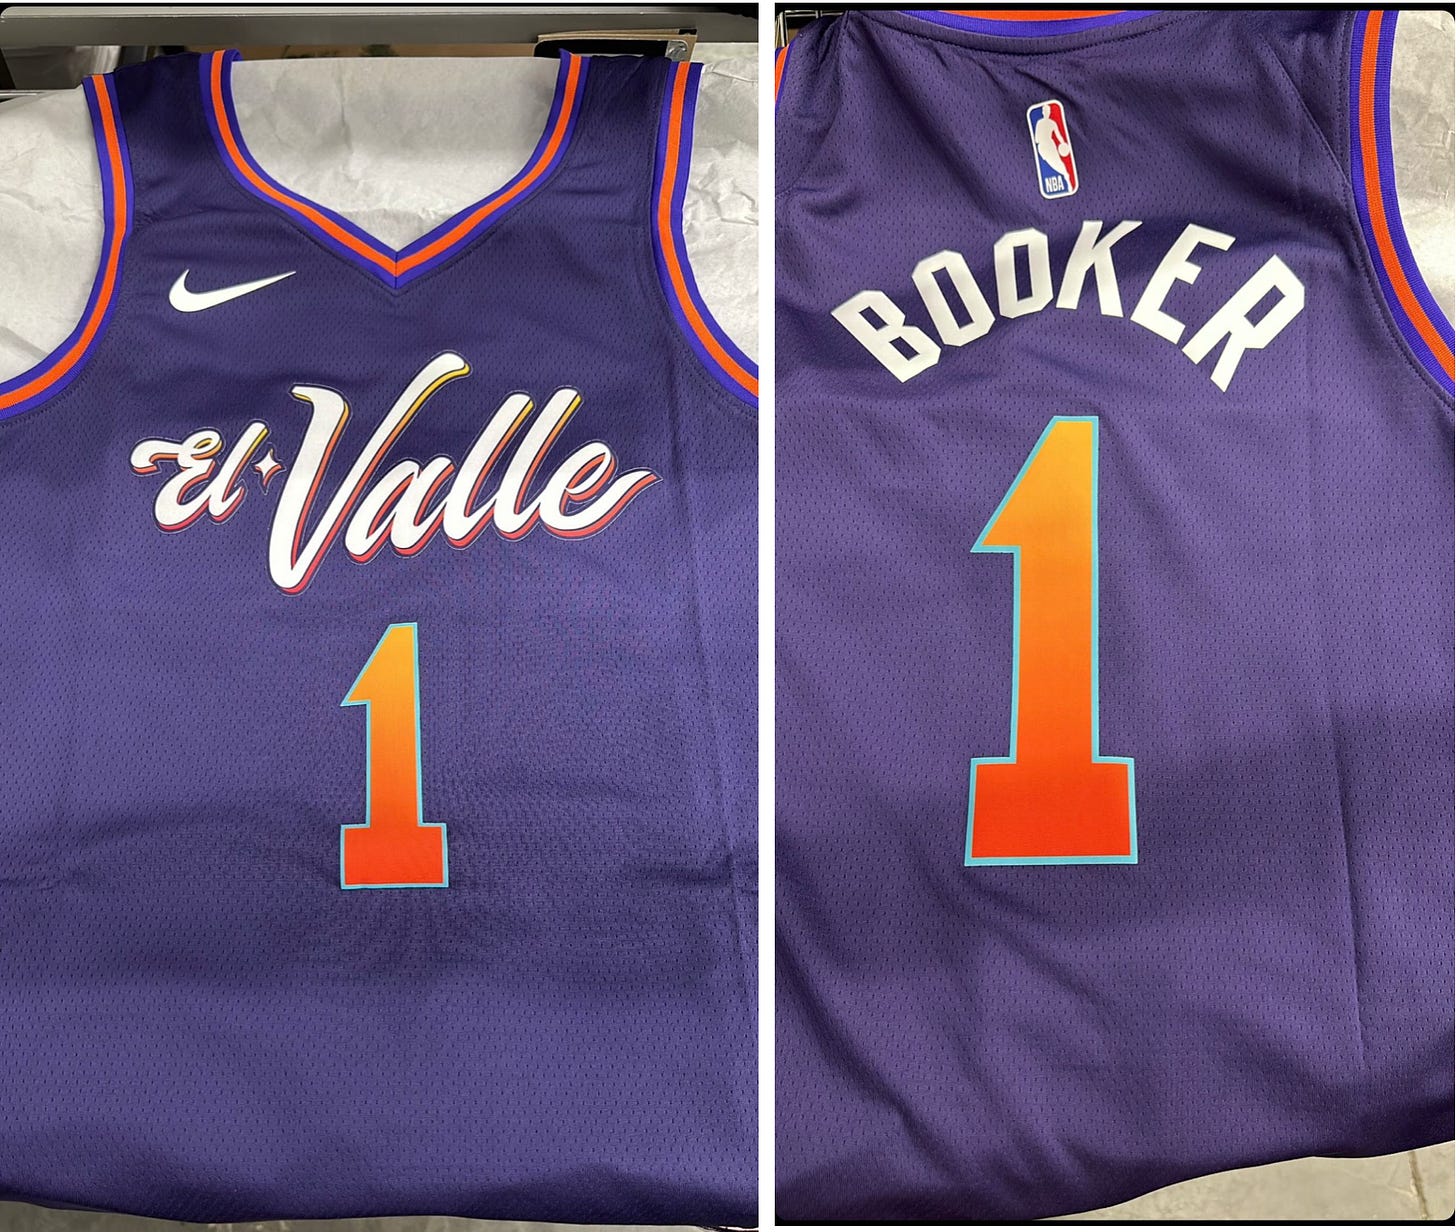 Making a purple Lakers themed rec league jersey. Should I go with gold or  white numbers? : r/basketballjerseys